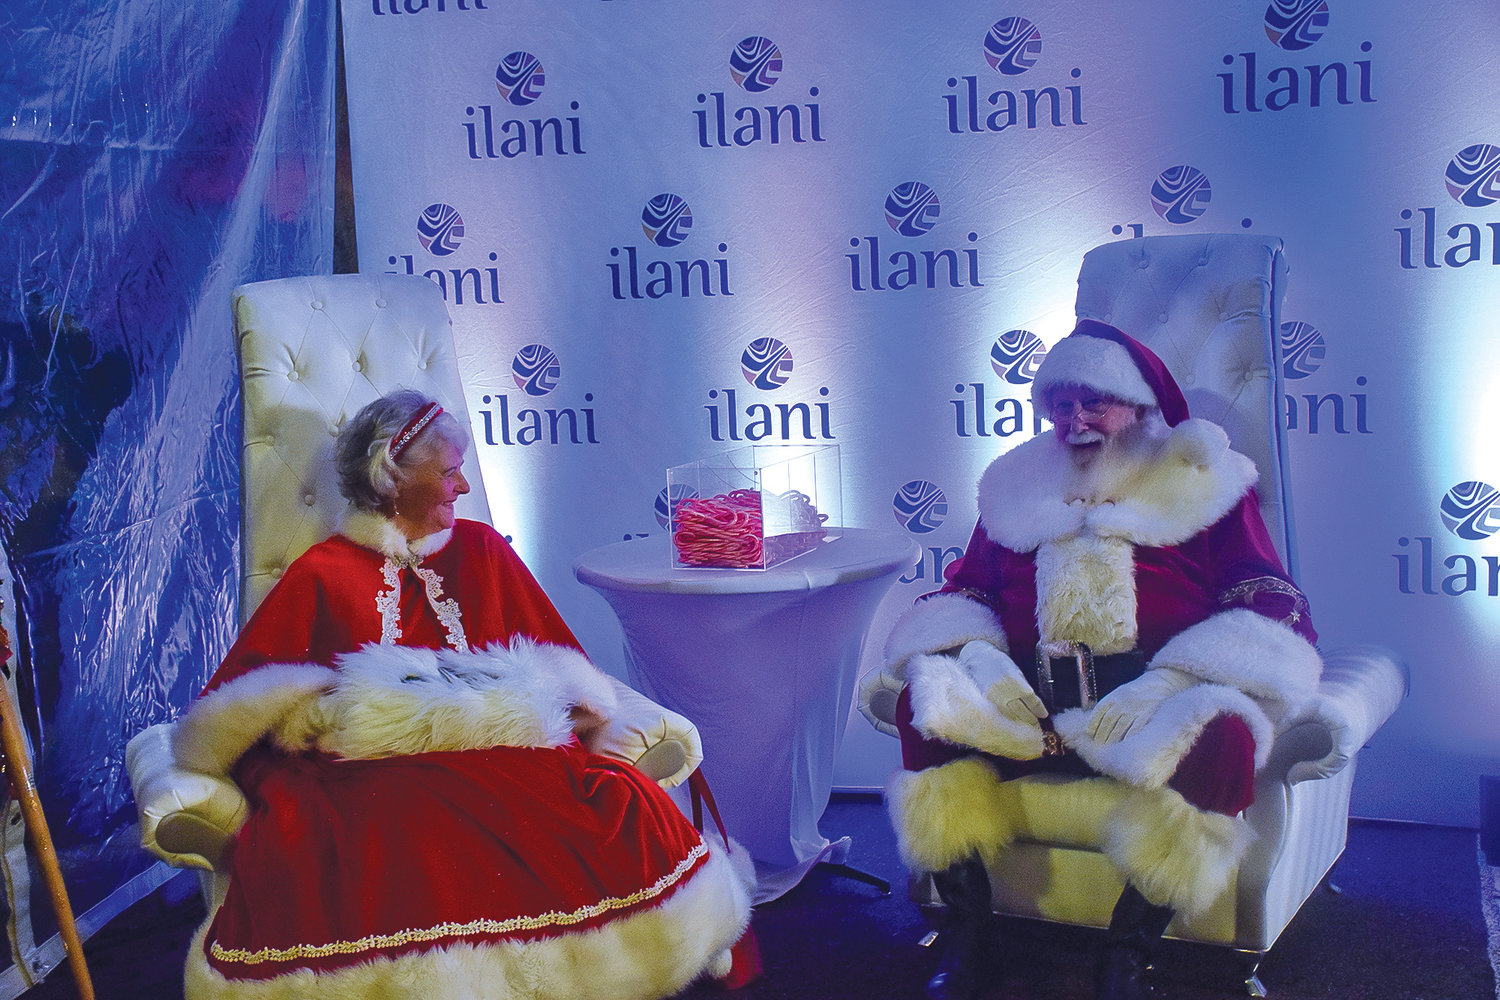 Santa and Mrs. Claus prepare to visit with children during a tree lighting event at ilani on Nov. 23.